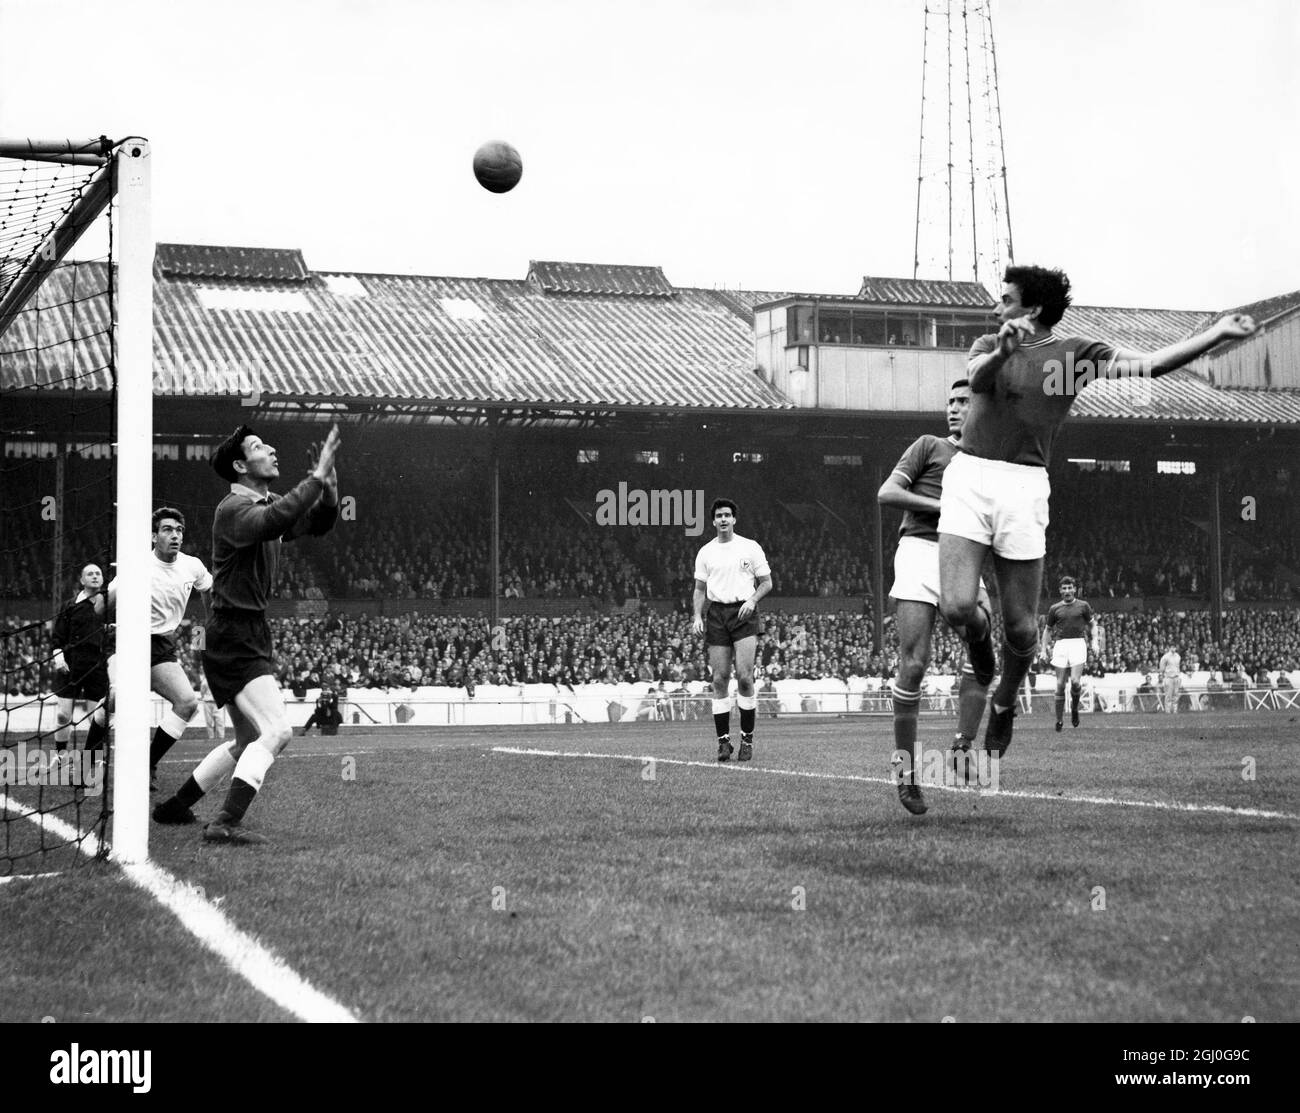 Chelsea v Tottenham Hotspur Tambling, the Chelsea inside-right, heads the ball over Brown, the Spurs' goalkeeper and over the bar for a goal kick during the match at Stamford Bridge. 21st September 1963 Stock Photo